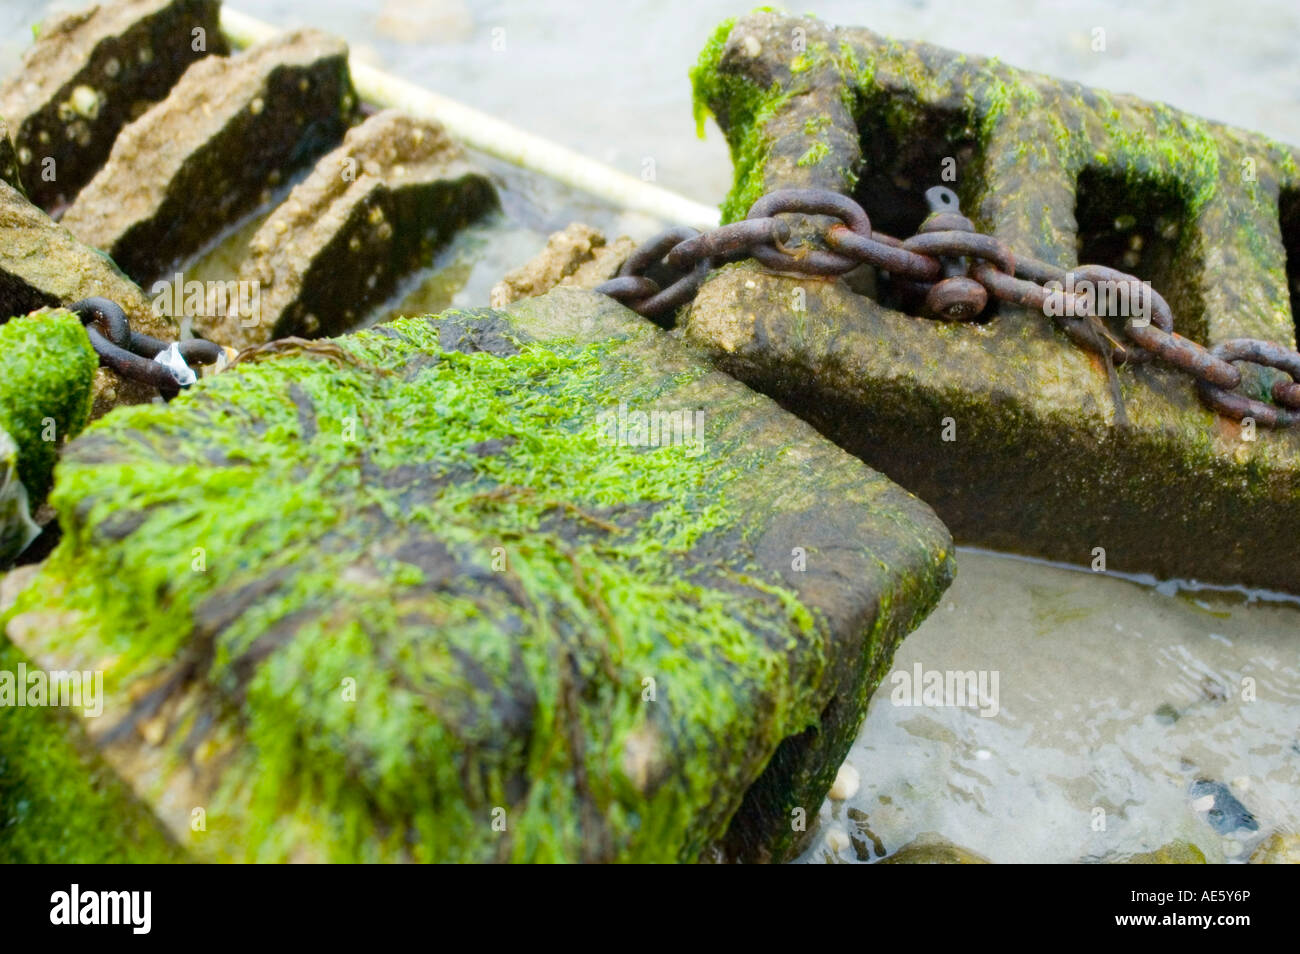 algae covered rocks with chain Stock Photo